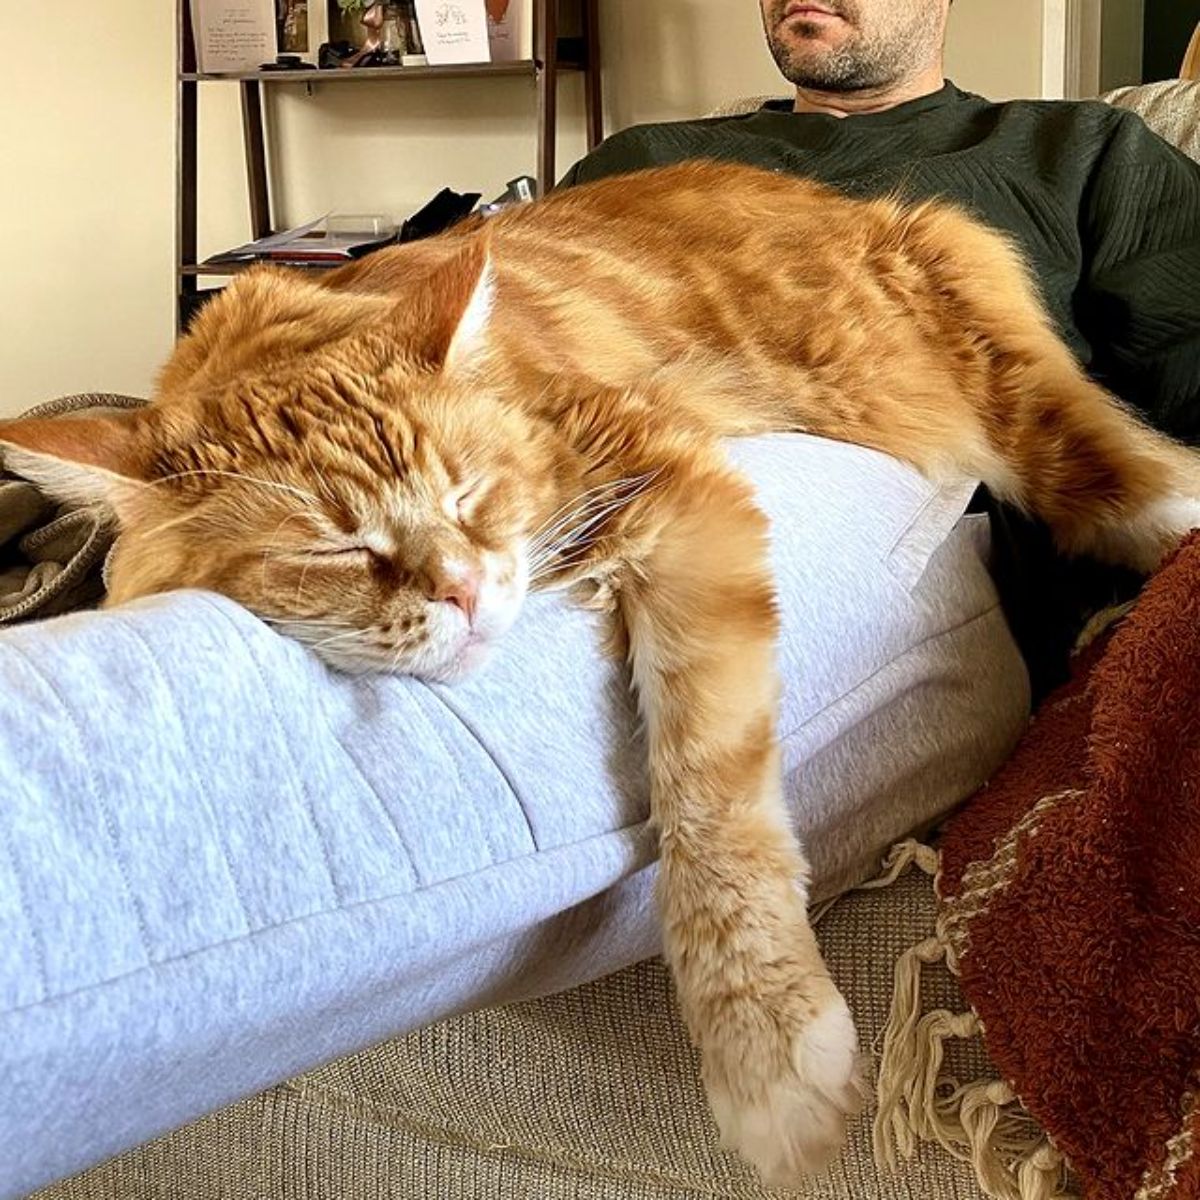 A huge ginger maine coon lying on a man's legs.